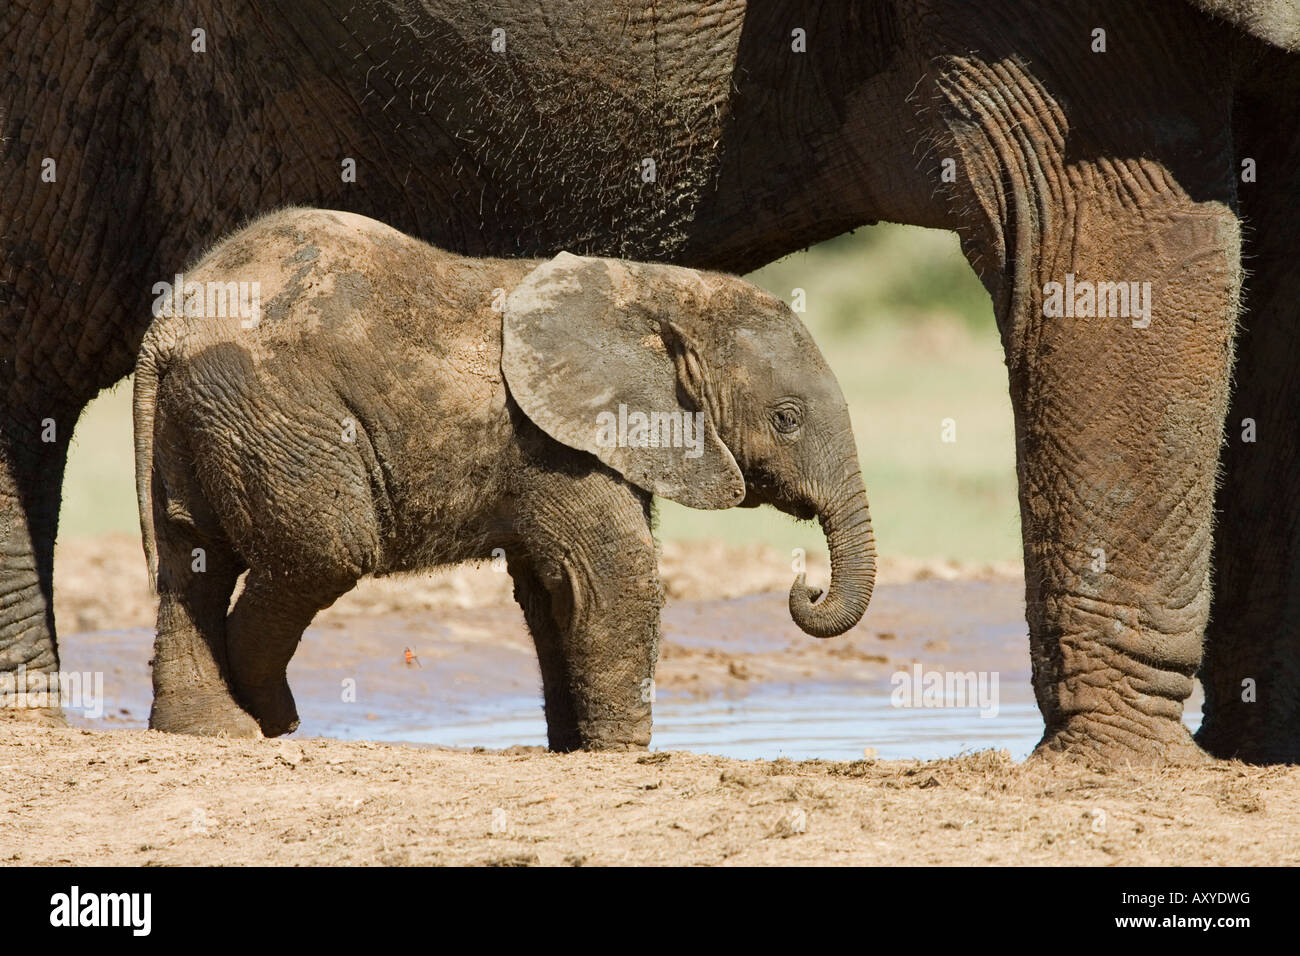 Baby African elephant (Loxodonta africana) standing by its mother, Addo Elephant National Park, South Africa, Africa Stock Photo